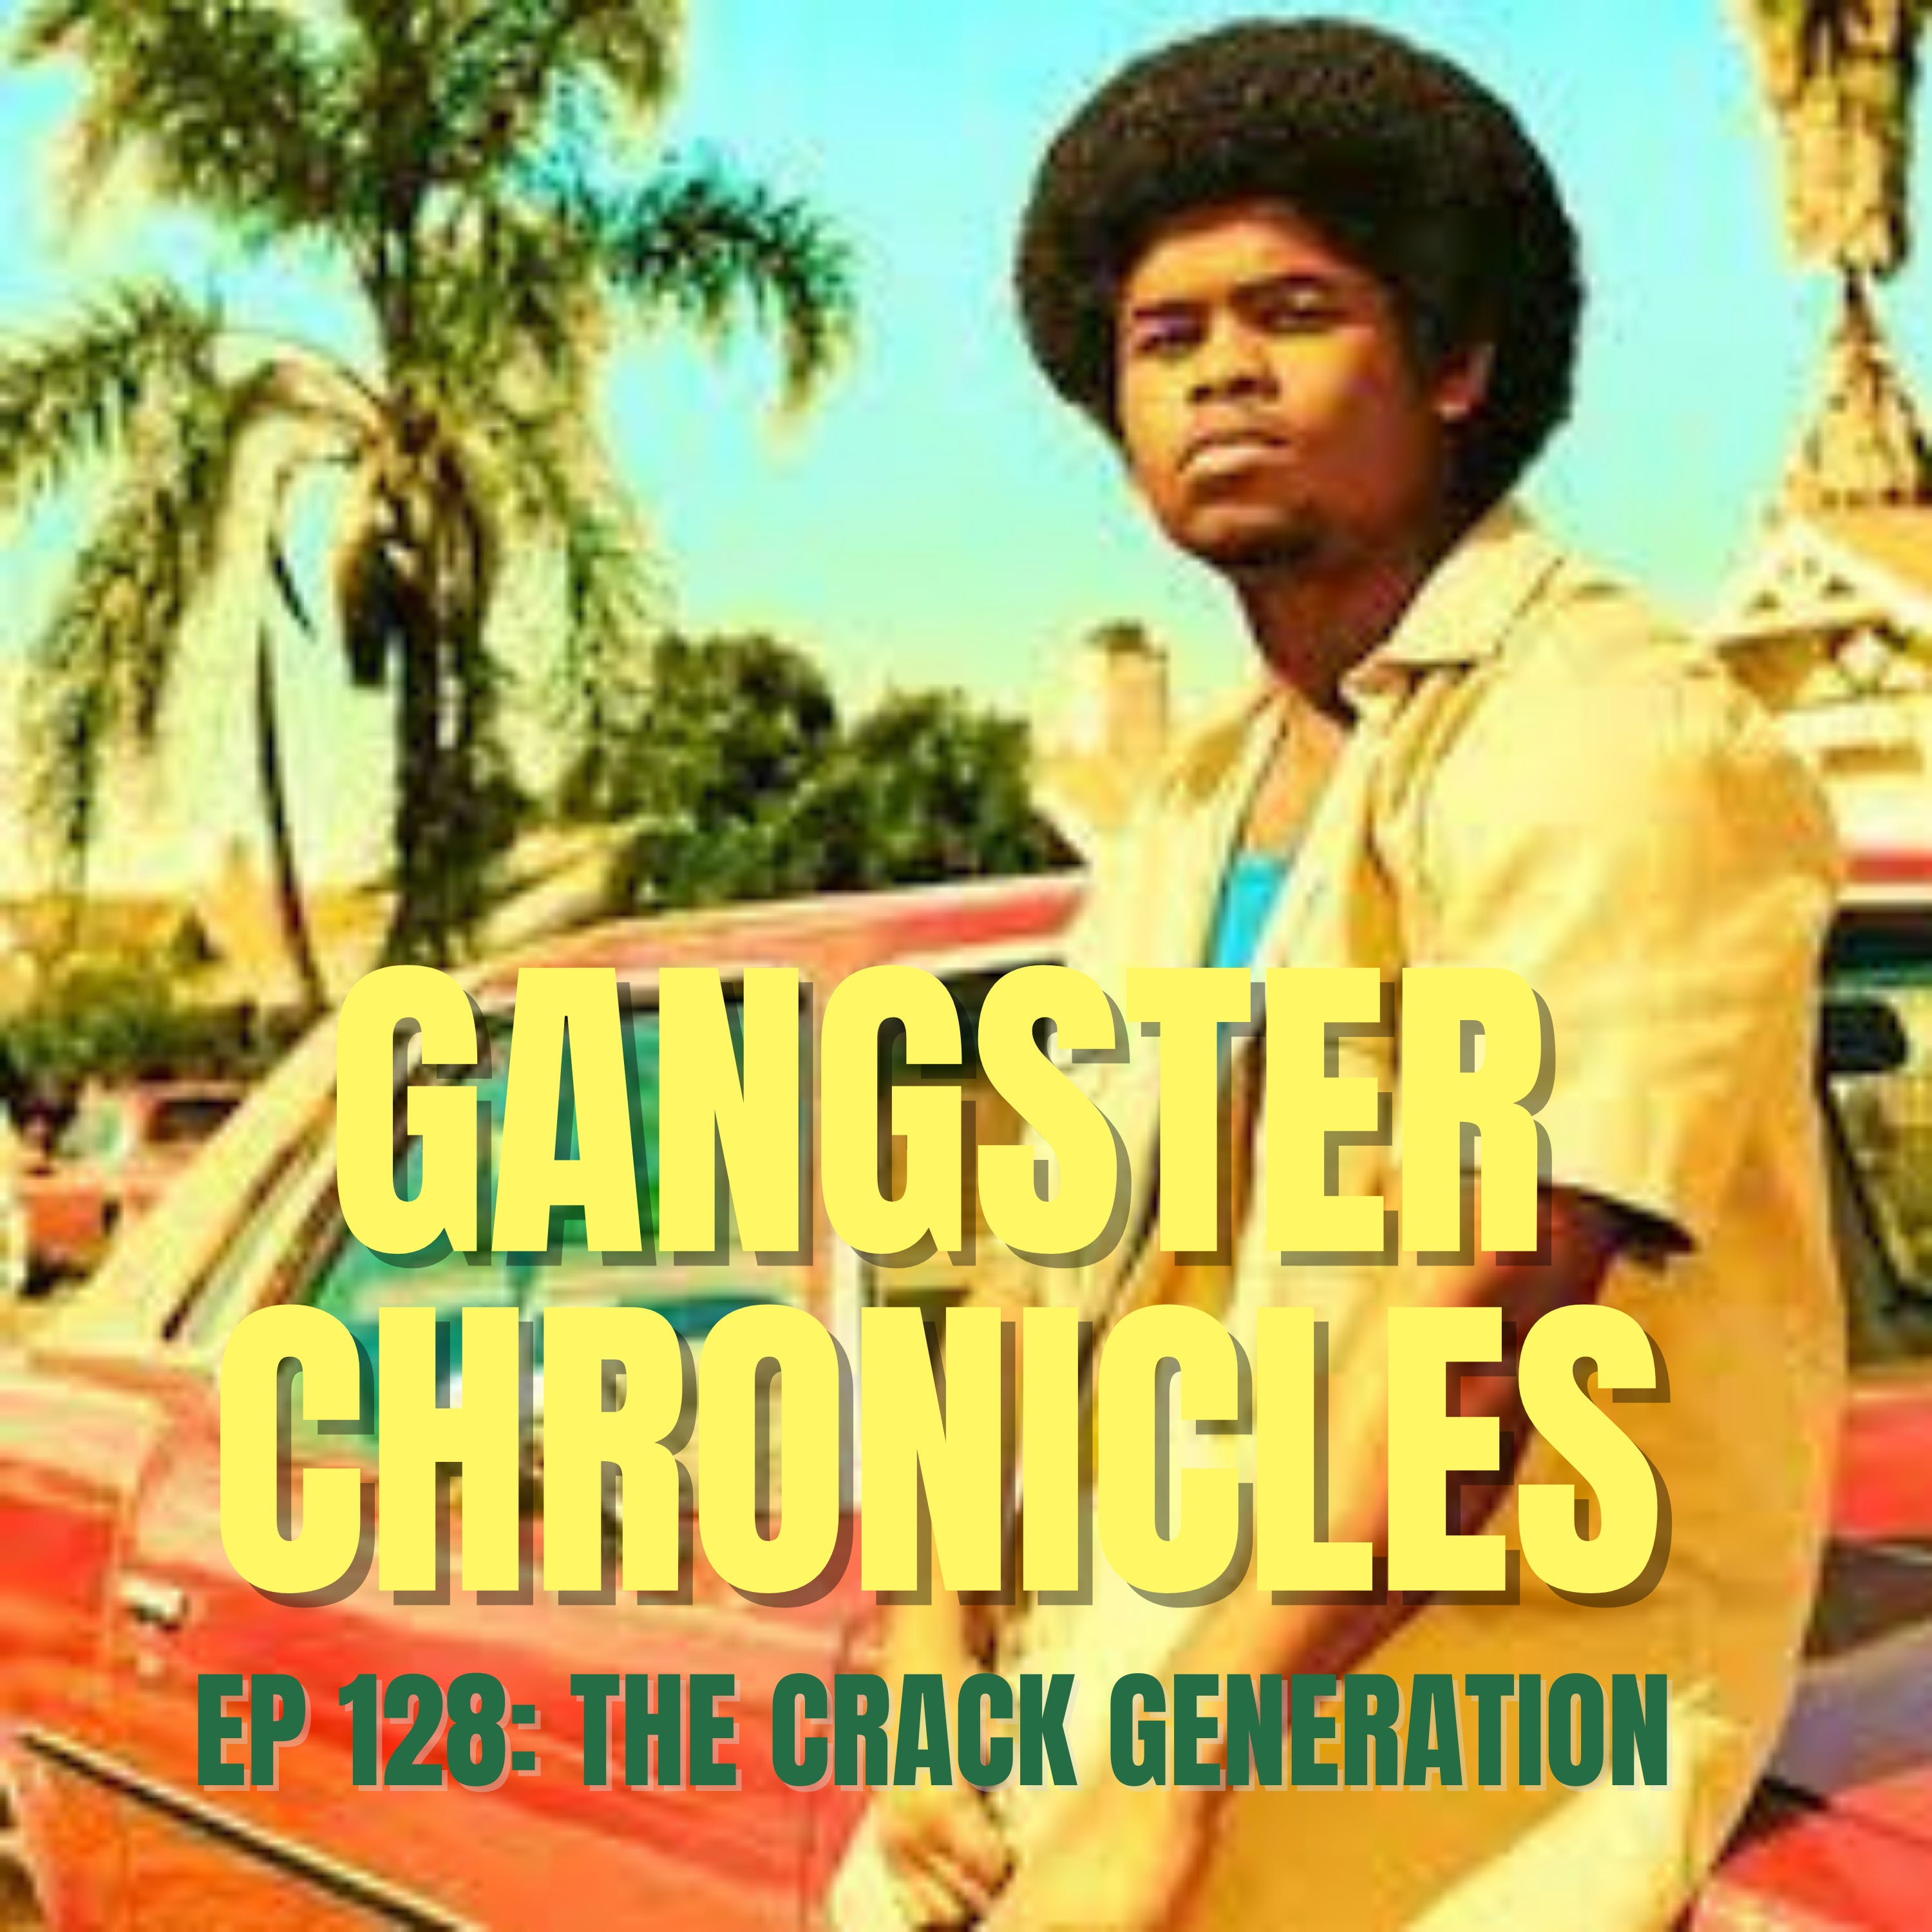 EP 128: The Crack Generation